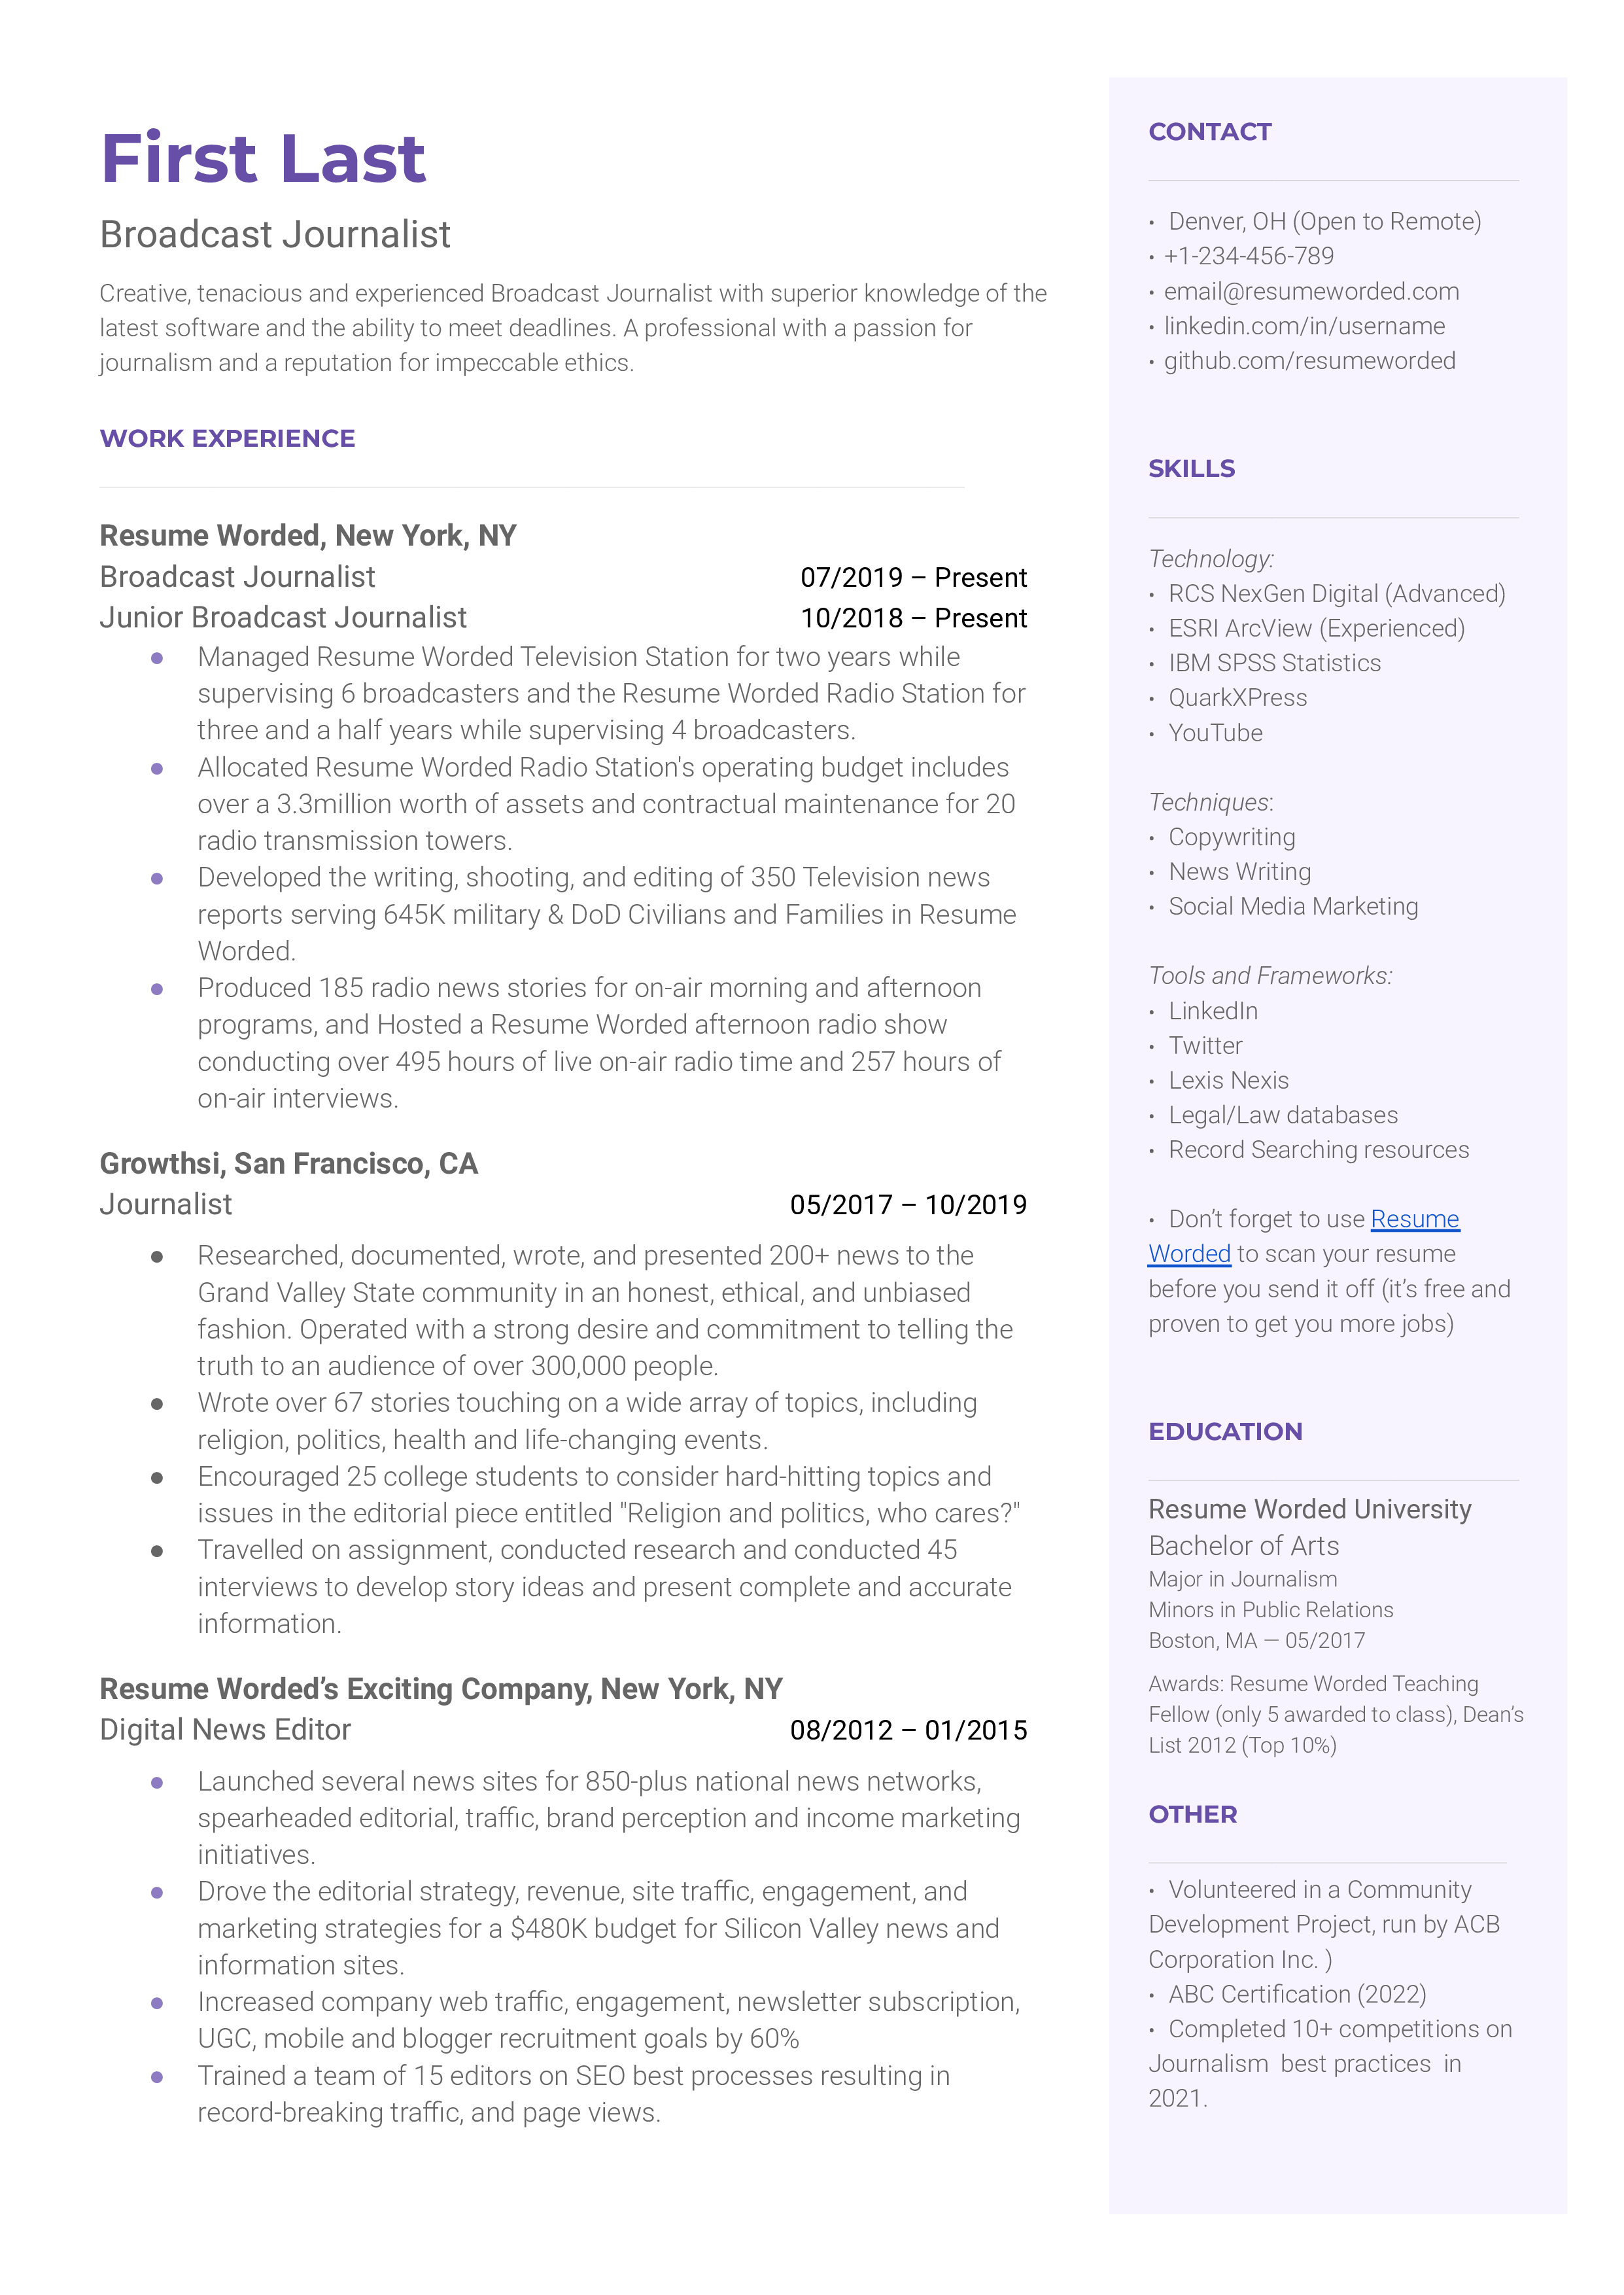 Broadcast journalist resume sample highlighting relevant skills and technology experience